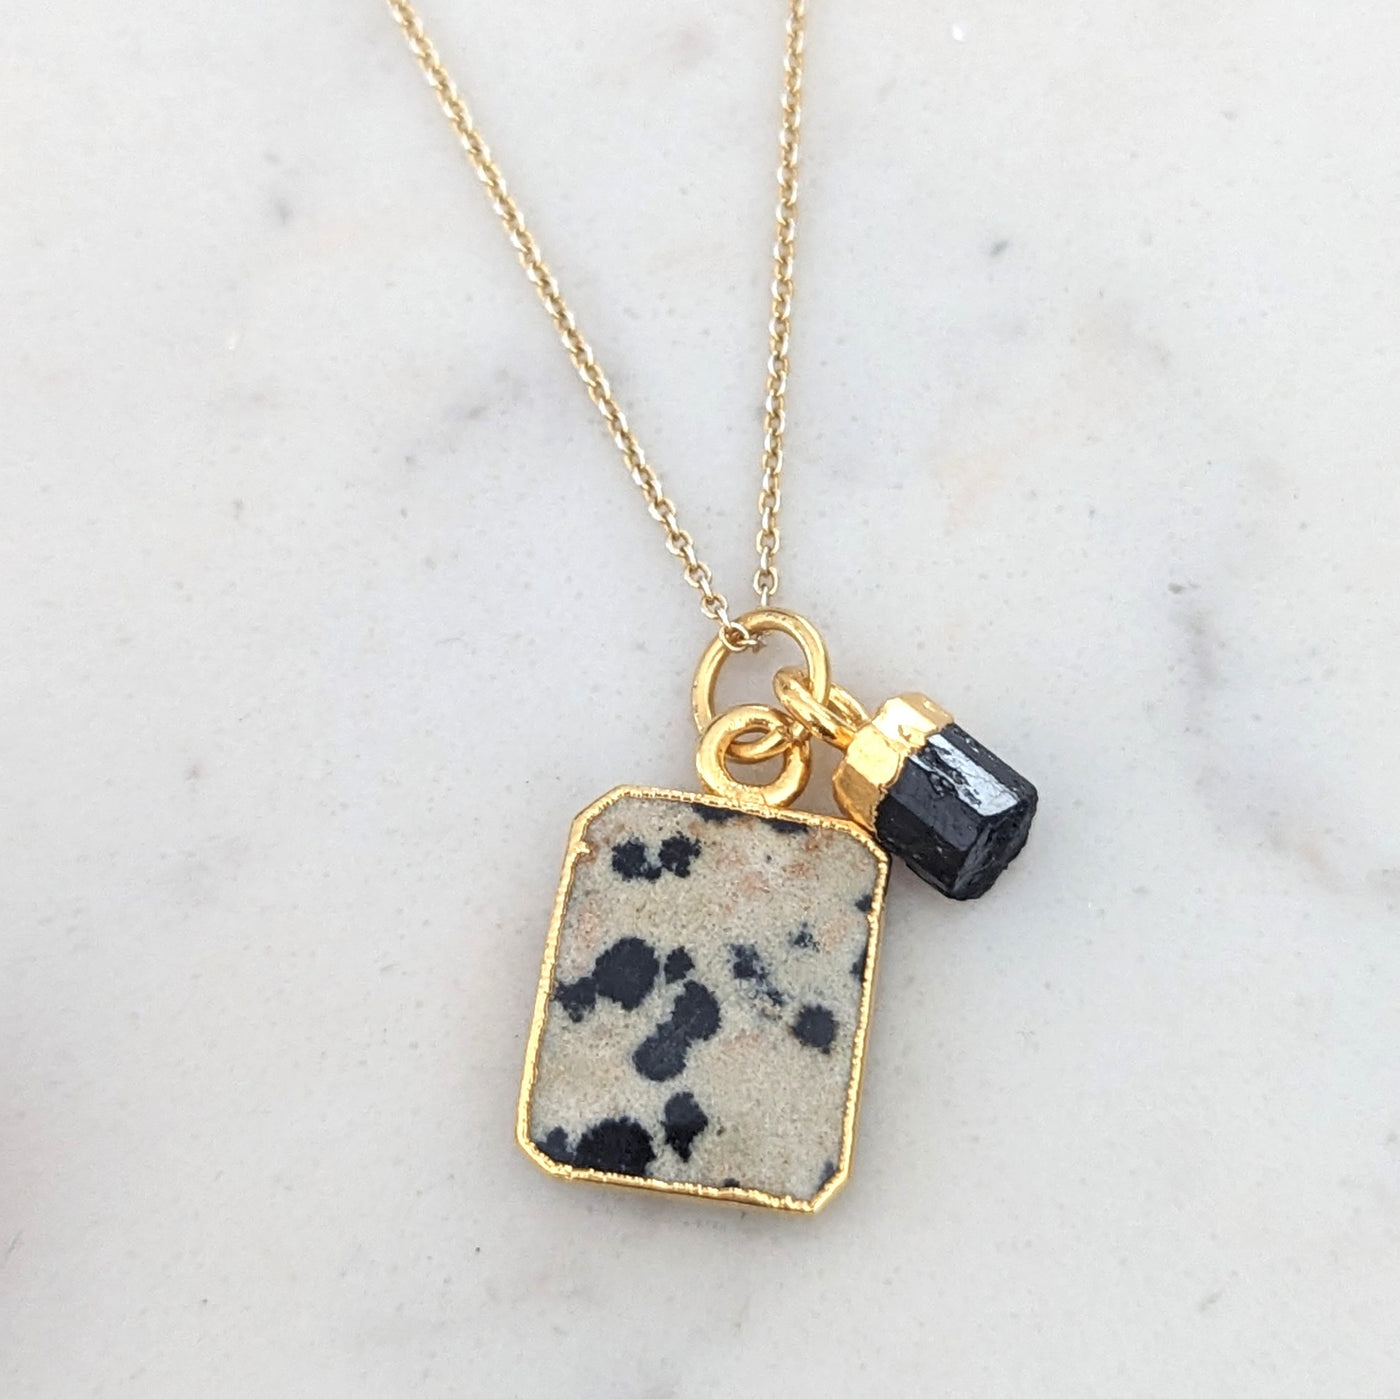 Dalmatian Jasper and Black Onyx gold plated necklace